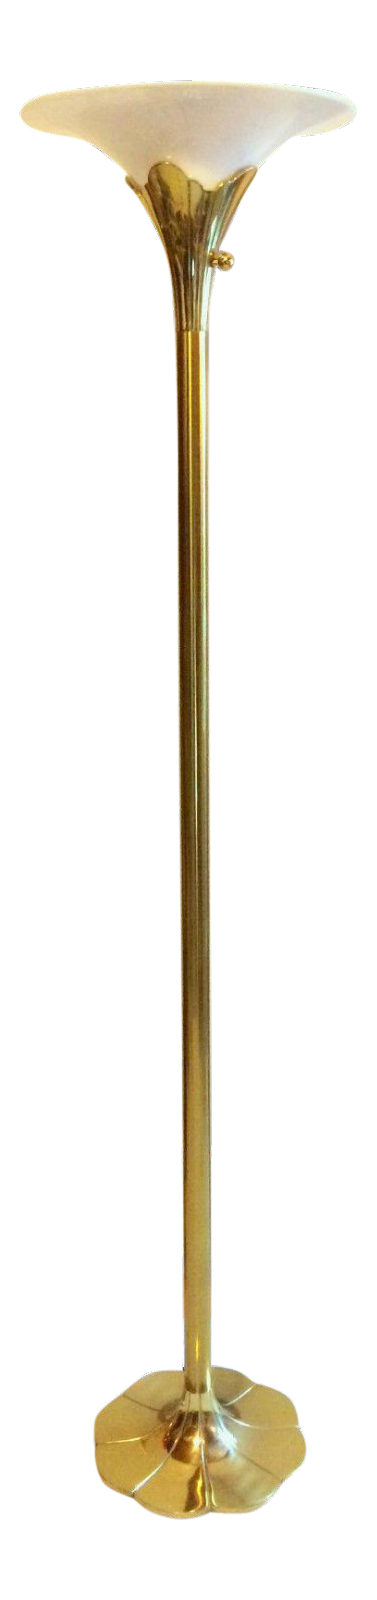 Stiffel brass floor lamp a type of
  traditional lamp